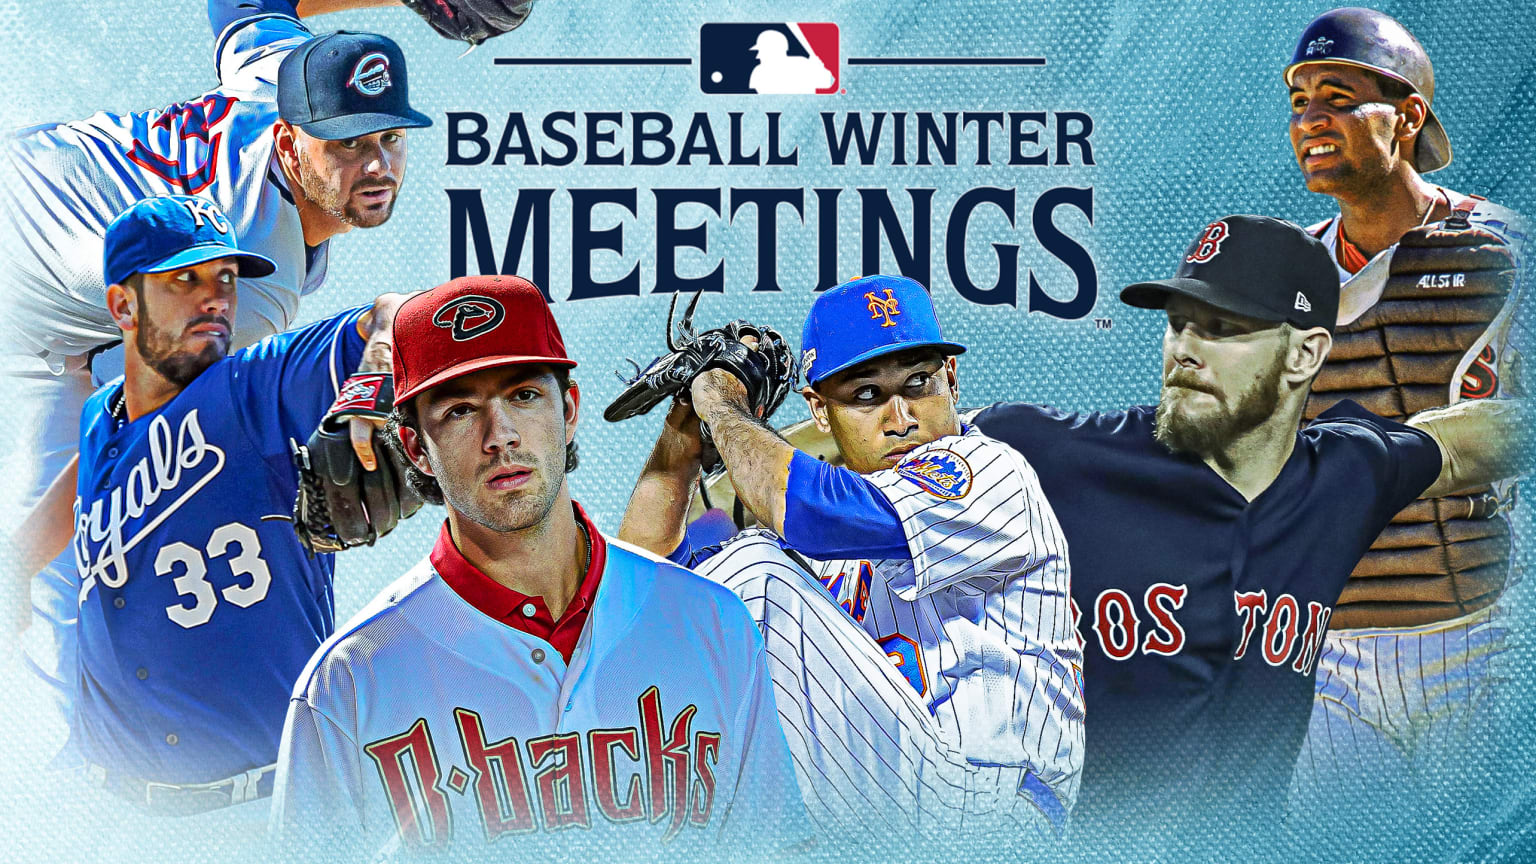 Six players are pictured with the Winter Meetings logo